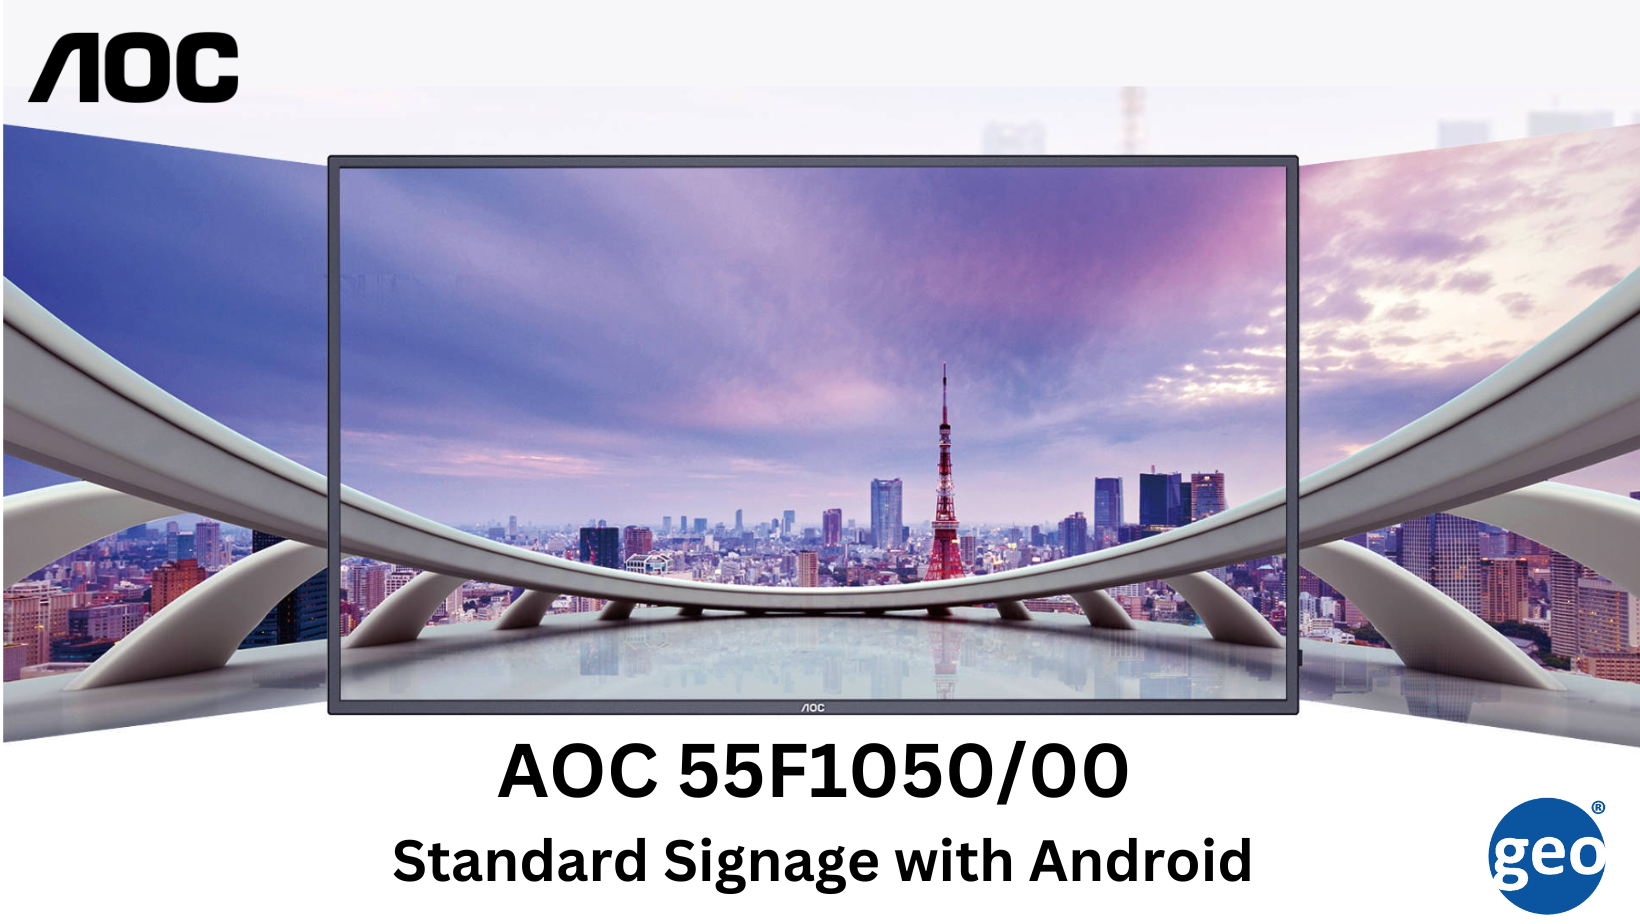 AOC: 55F1050/00 Standard Signage with Android